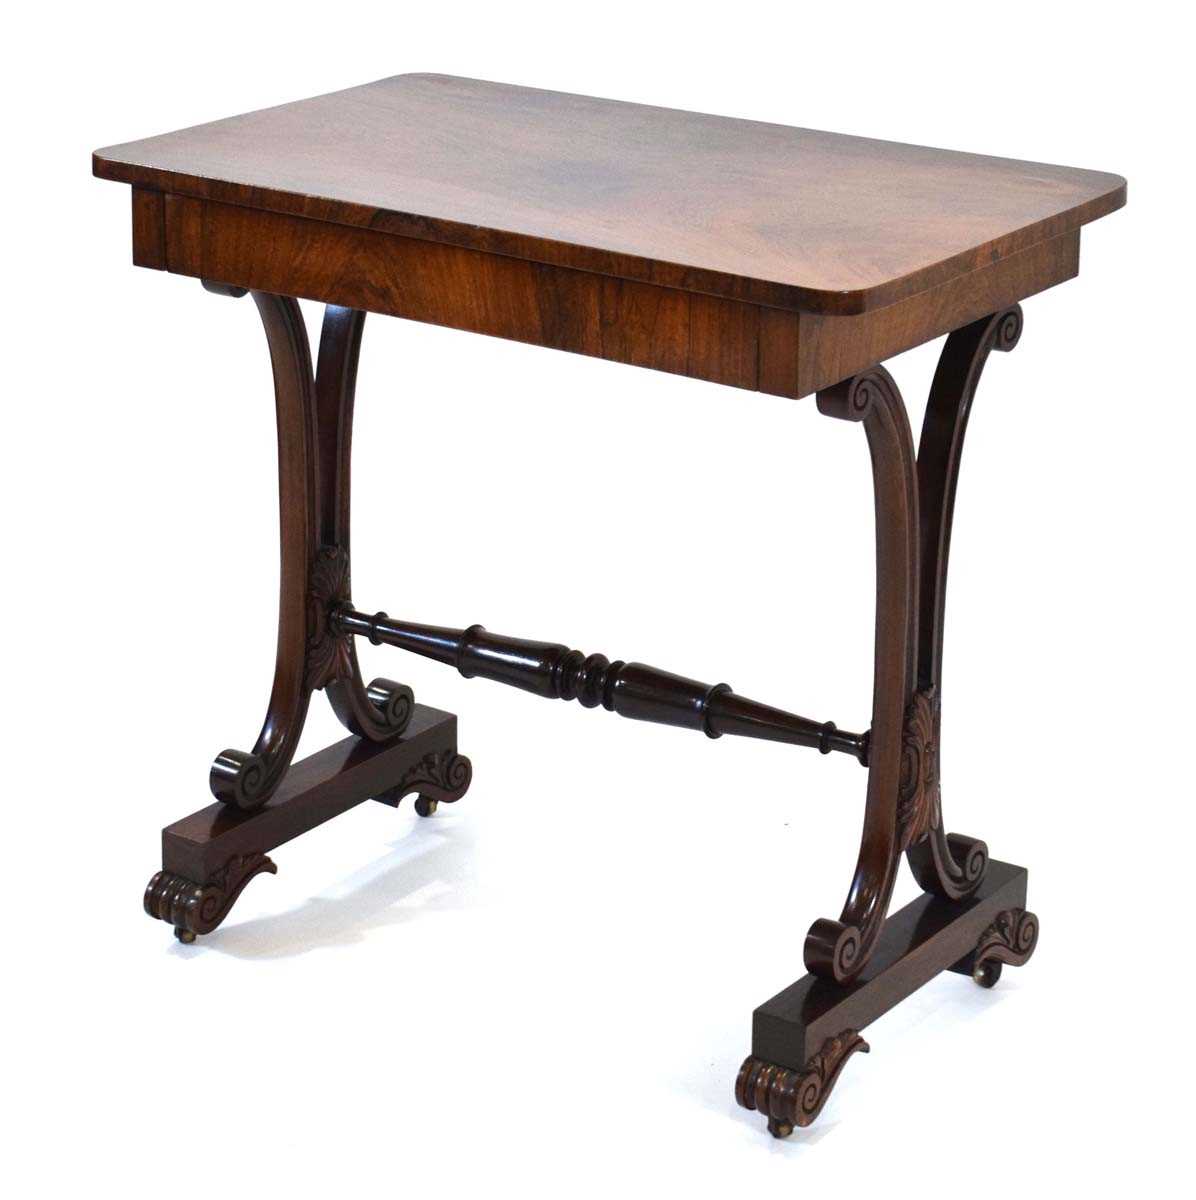 A mid-19th century rosewood side table with a single frieze drawer, scrolled supports and castors, - Image 2 of 4